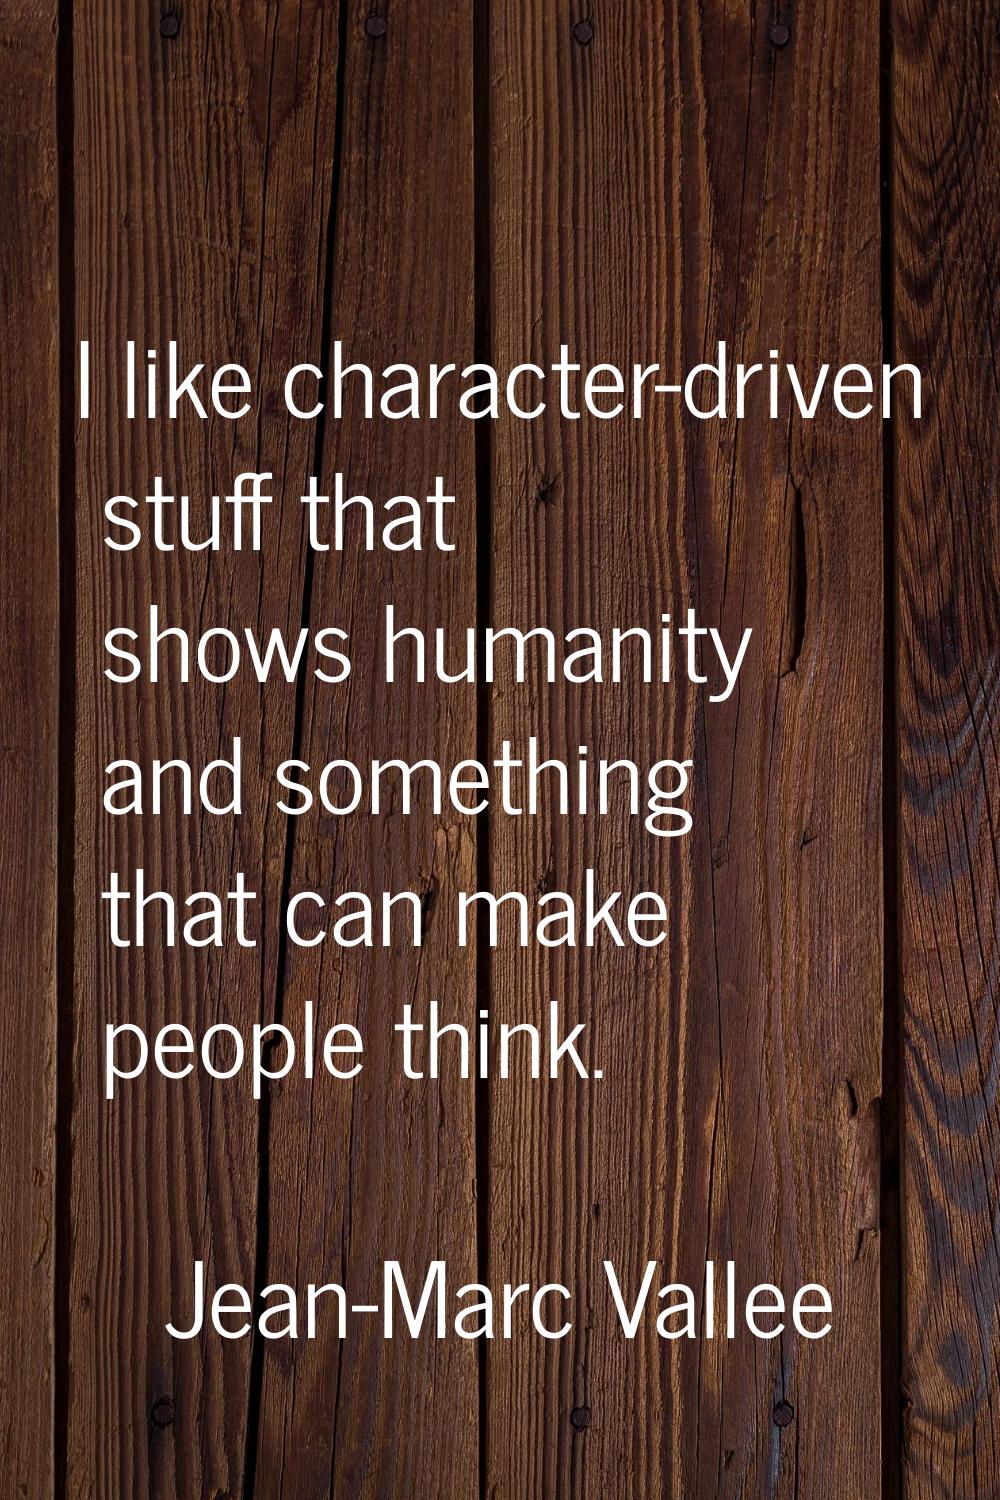 I like character-driven stuff that shows humanity and something that can make people think.